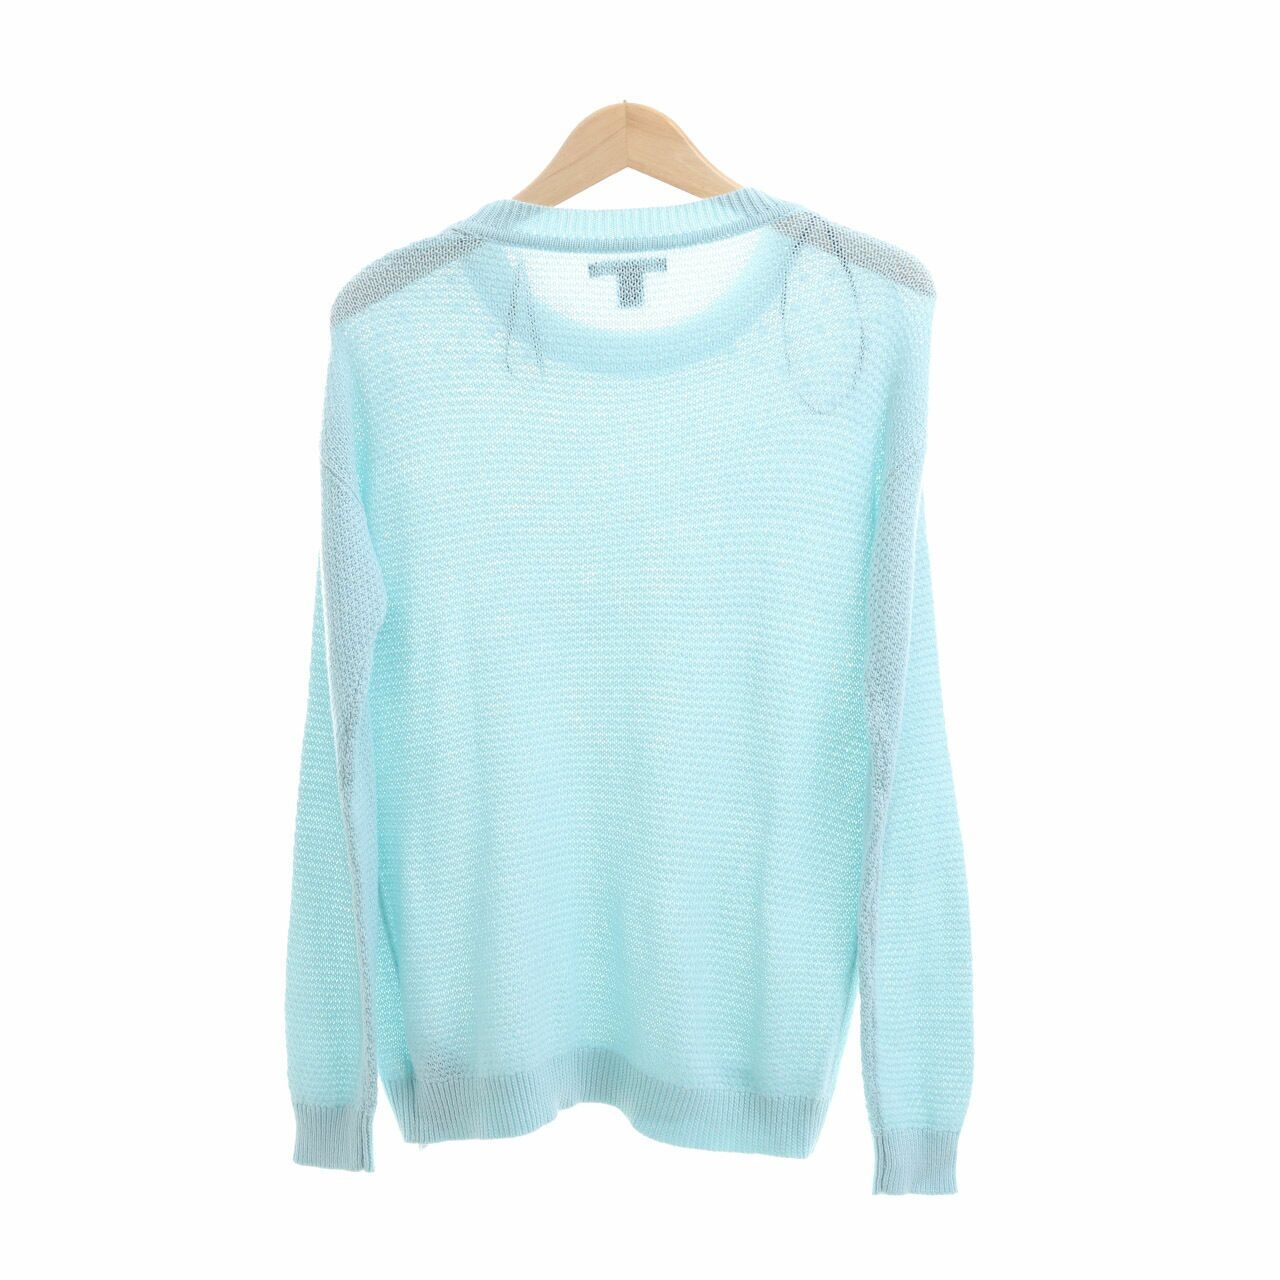 Forever 21 Mint Beaded Knit Sweater